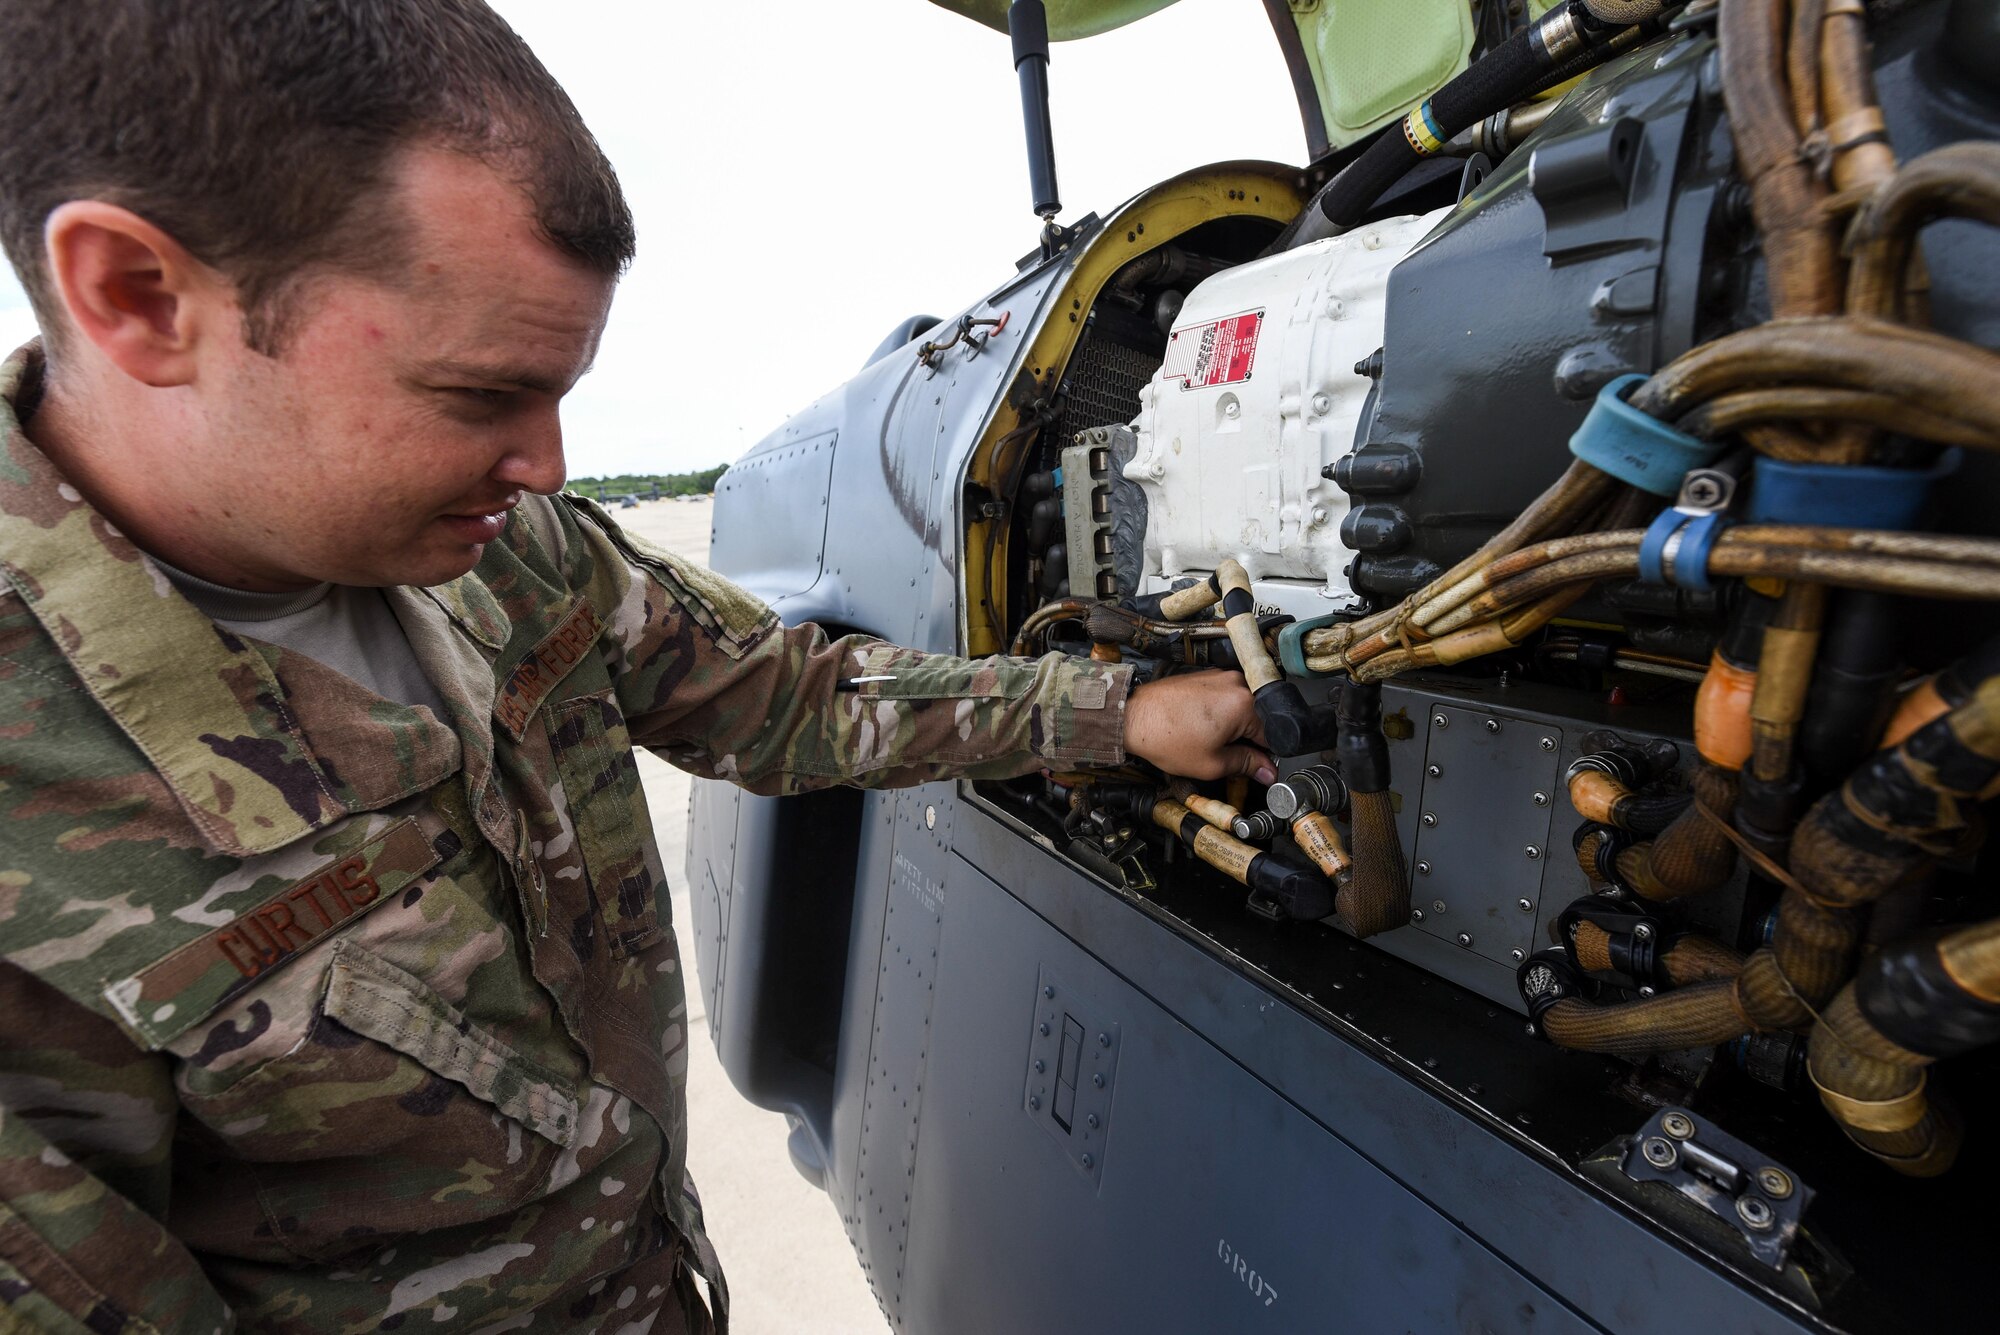 Staff Sgt. John Curtis, an electrical environmental specialist with the Florida Air National Guard Detachment 2, inspects a CV-22 Osprey at Hurlburt Field, Fla., May 24, 2017. The FLANG Det 2 employs officers and enlisted personnel in maintenance and aircrew positions to aid the 8th Special Operations Squadron and the 801st Special Operations Aircraft Maintenance Squadron. (U.S. Air Force photo by Staff Sgt. Jeff Parkinson)